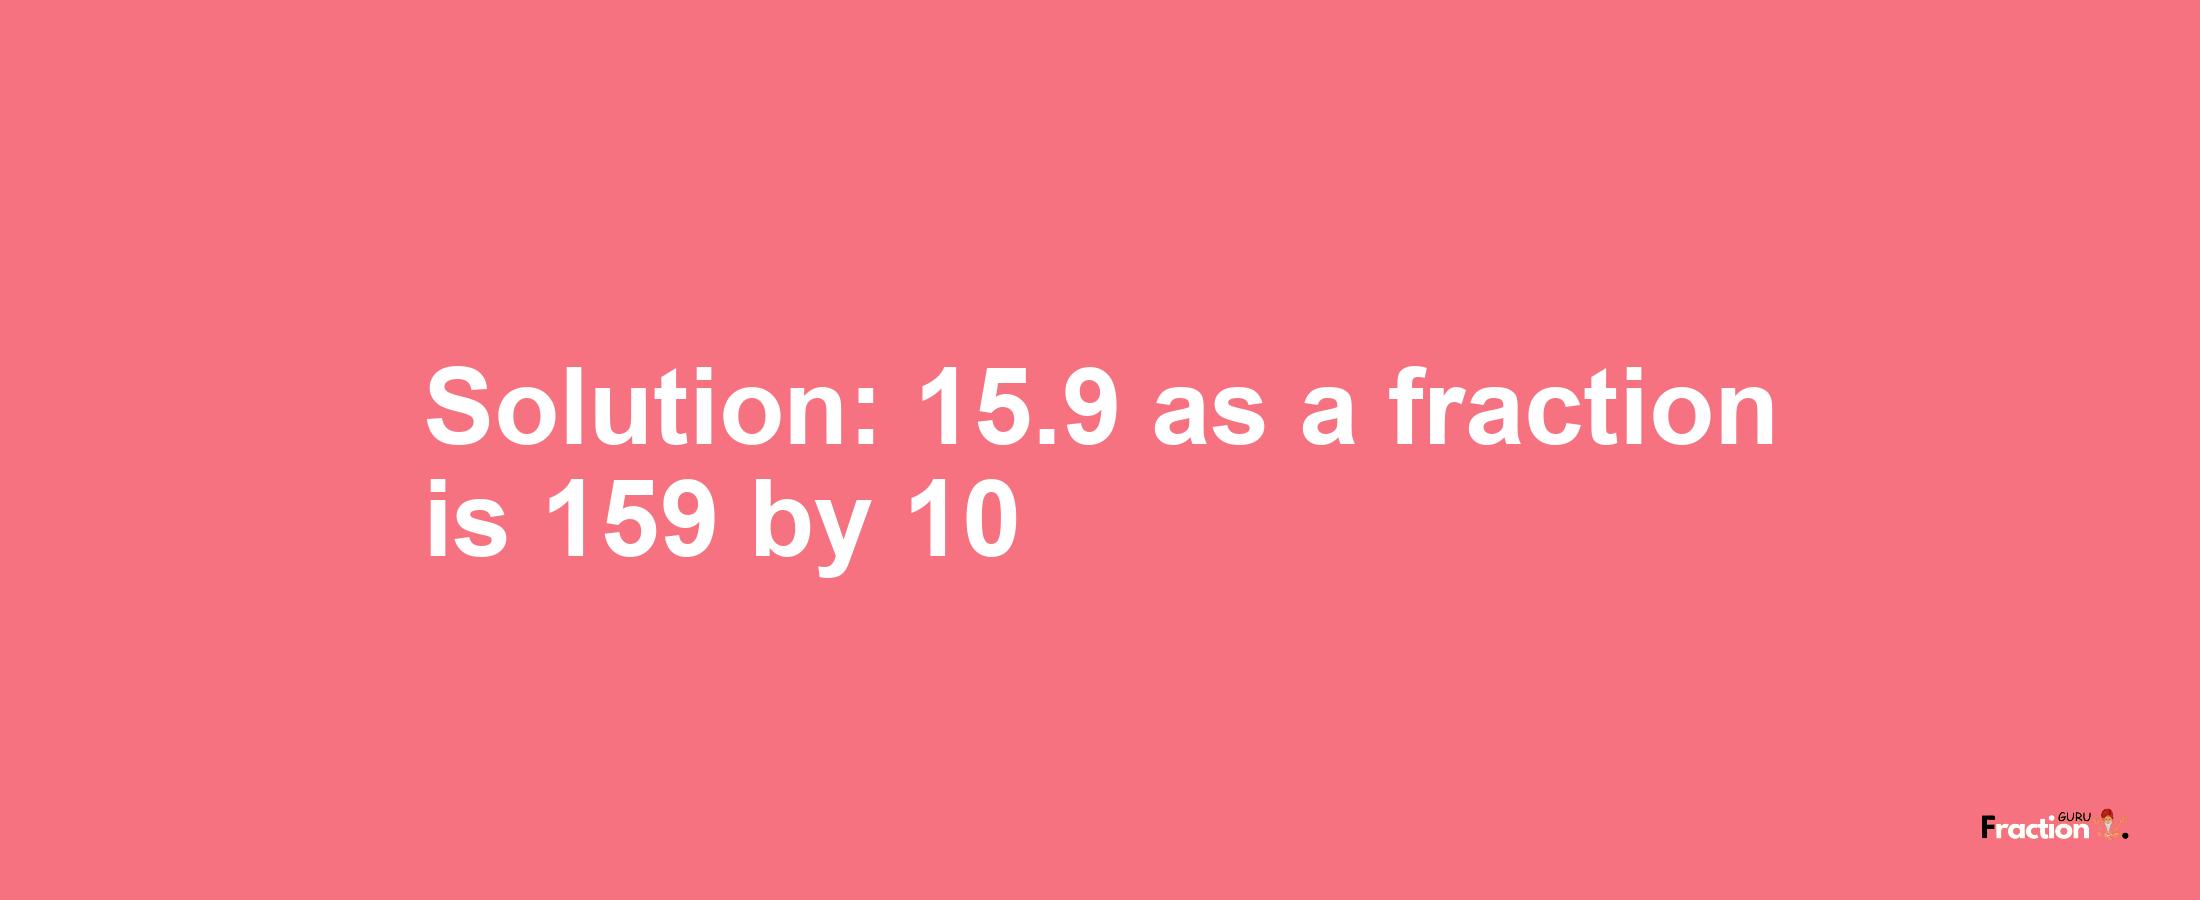 Solution:15.9 as a fraction is 159/10